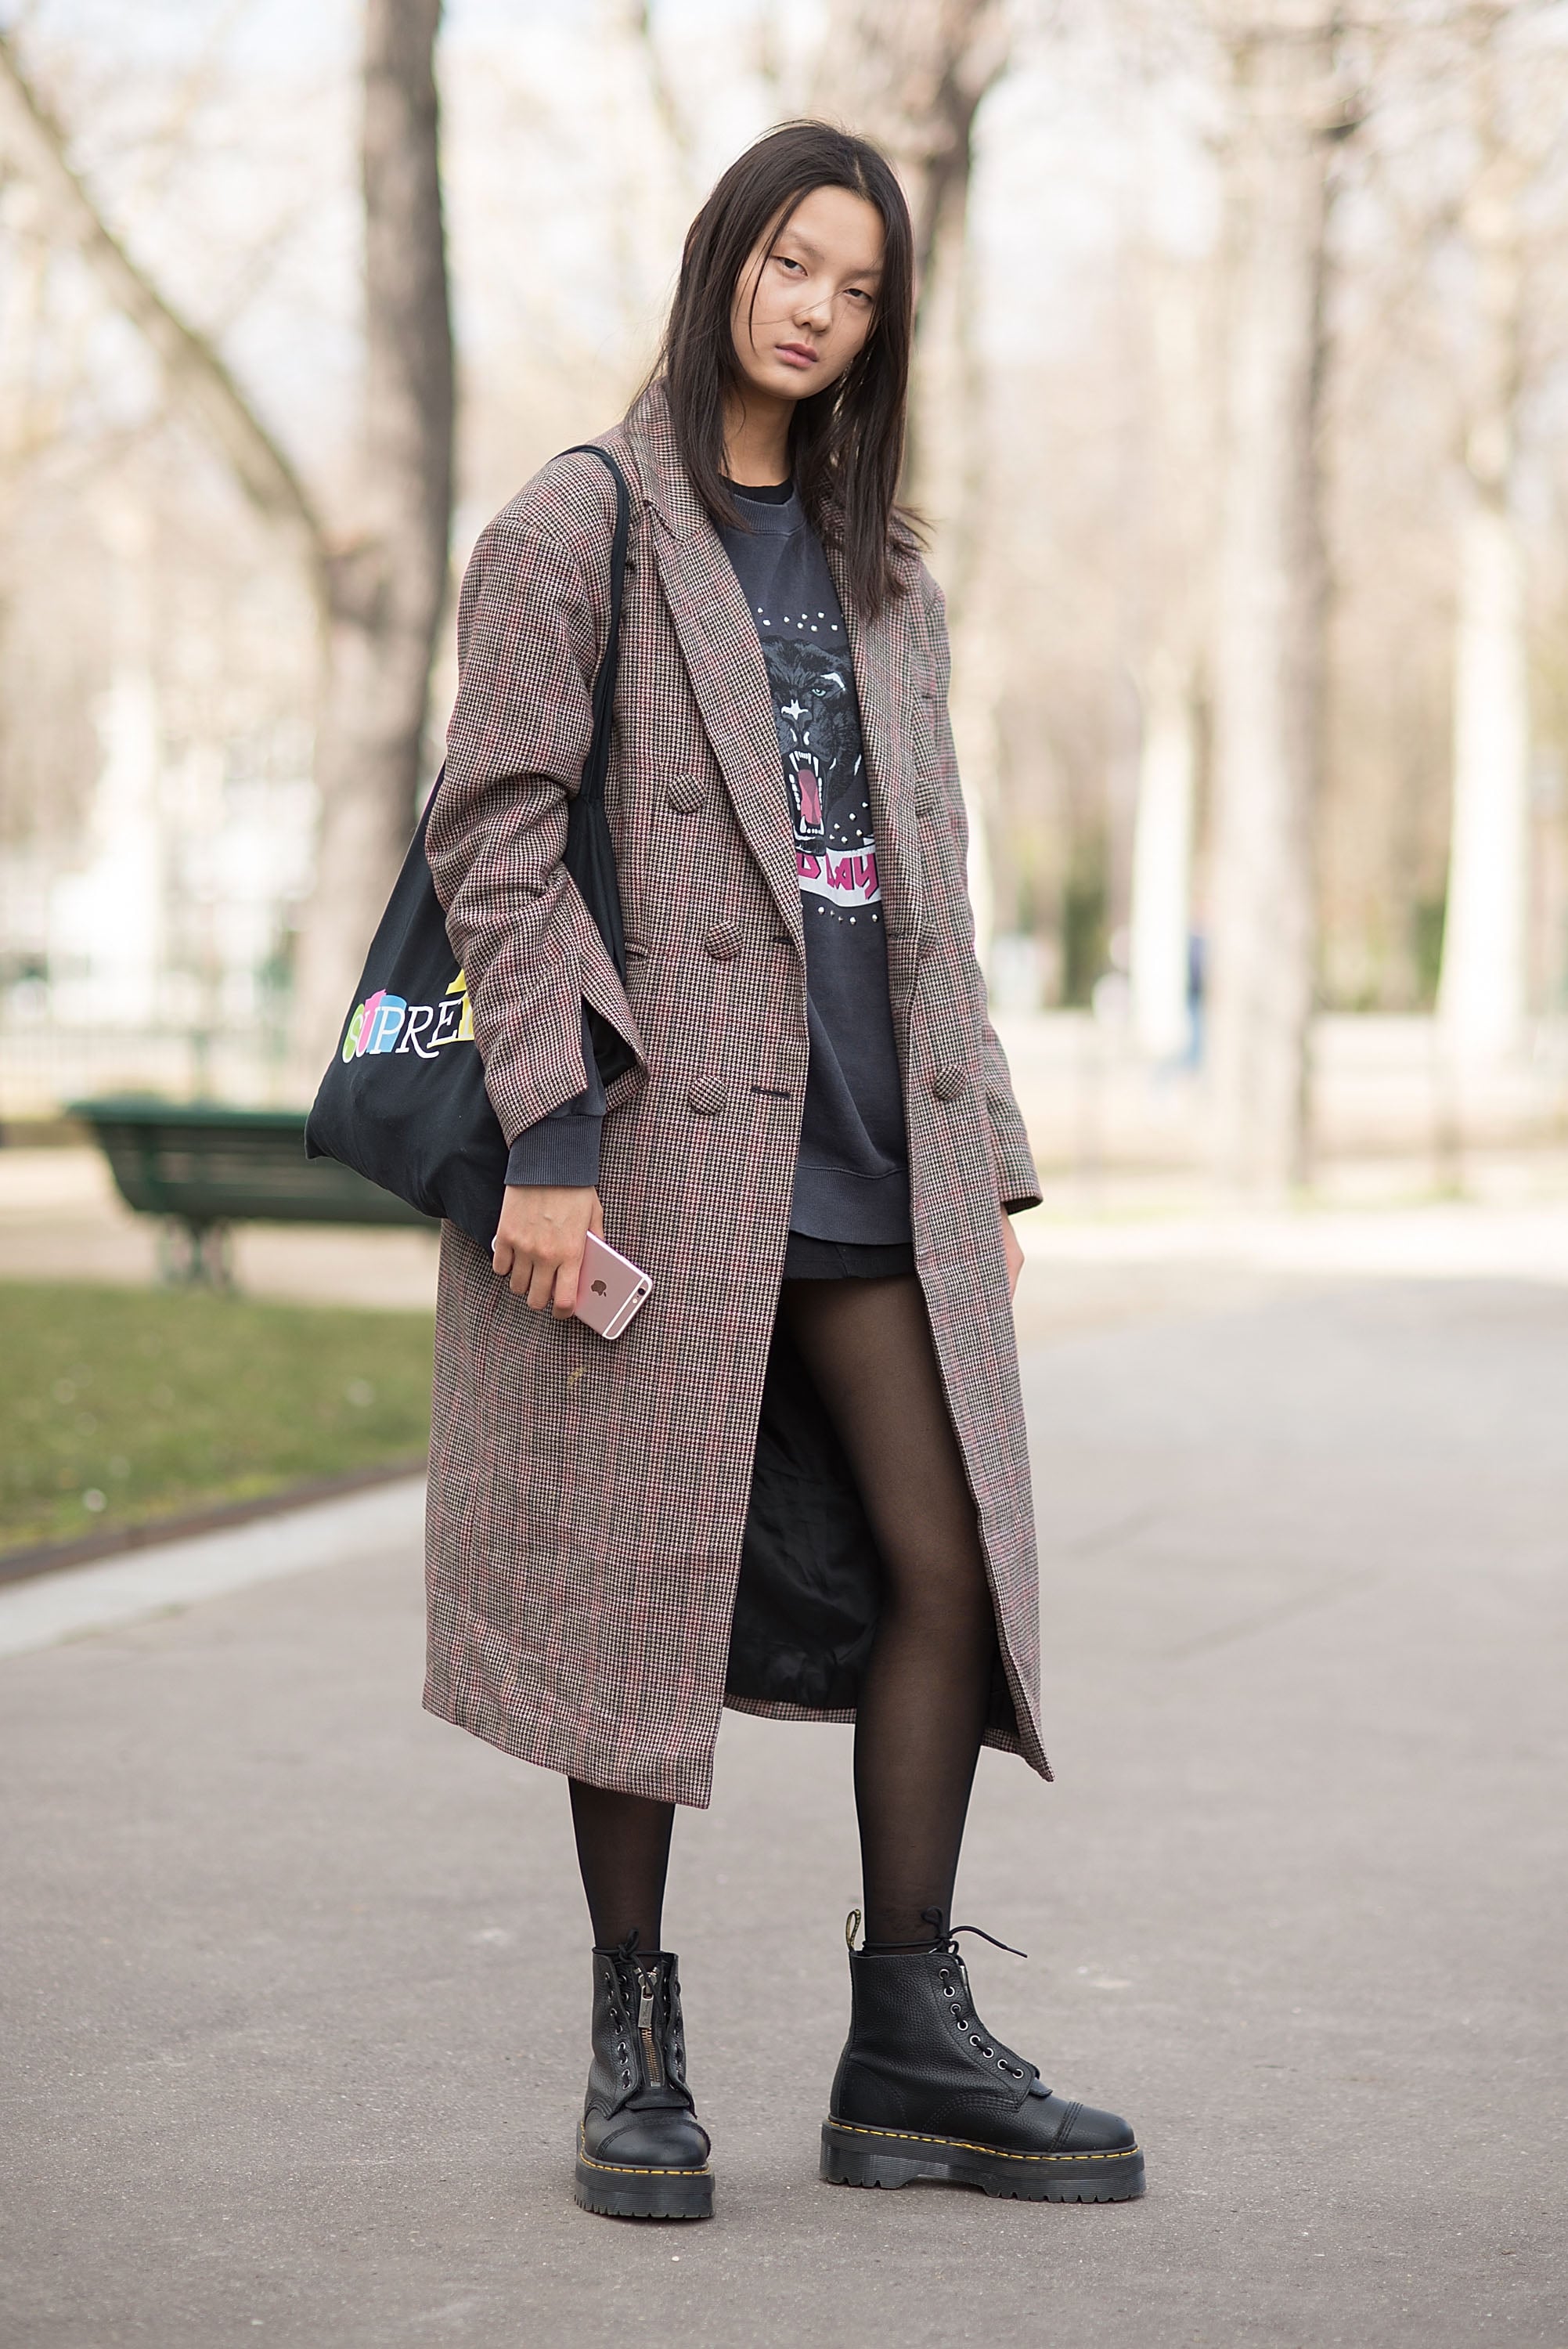 dr martens boots outfit ideas